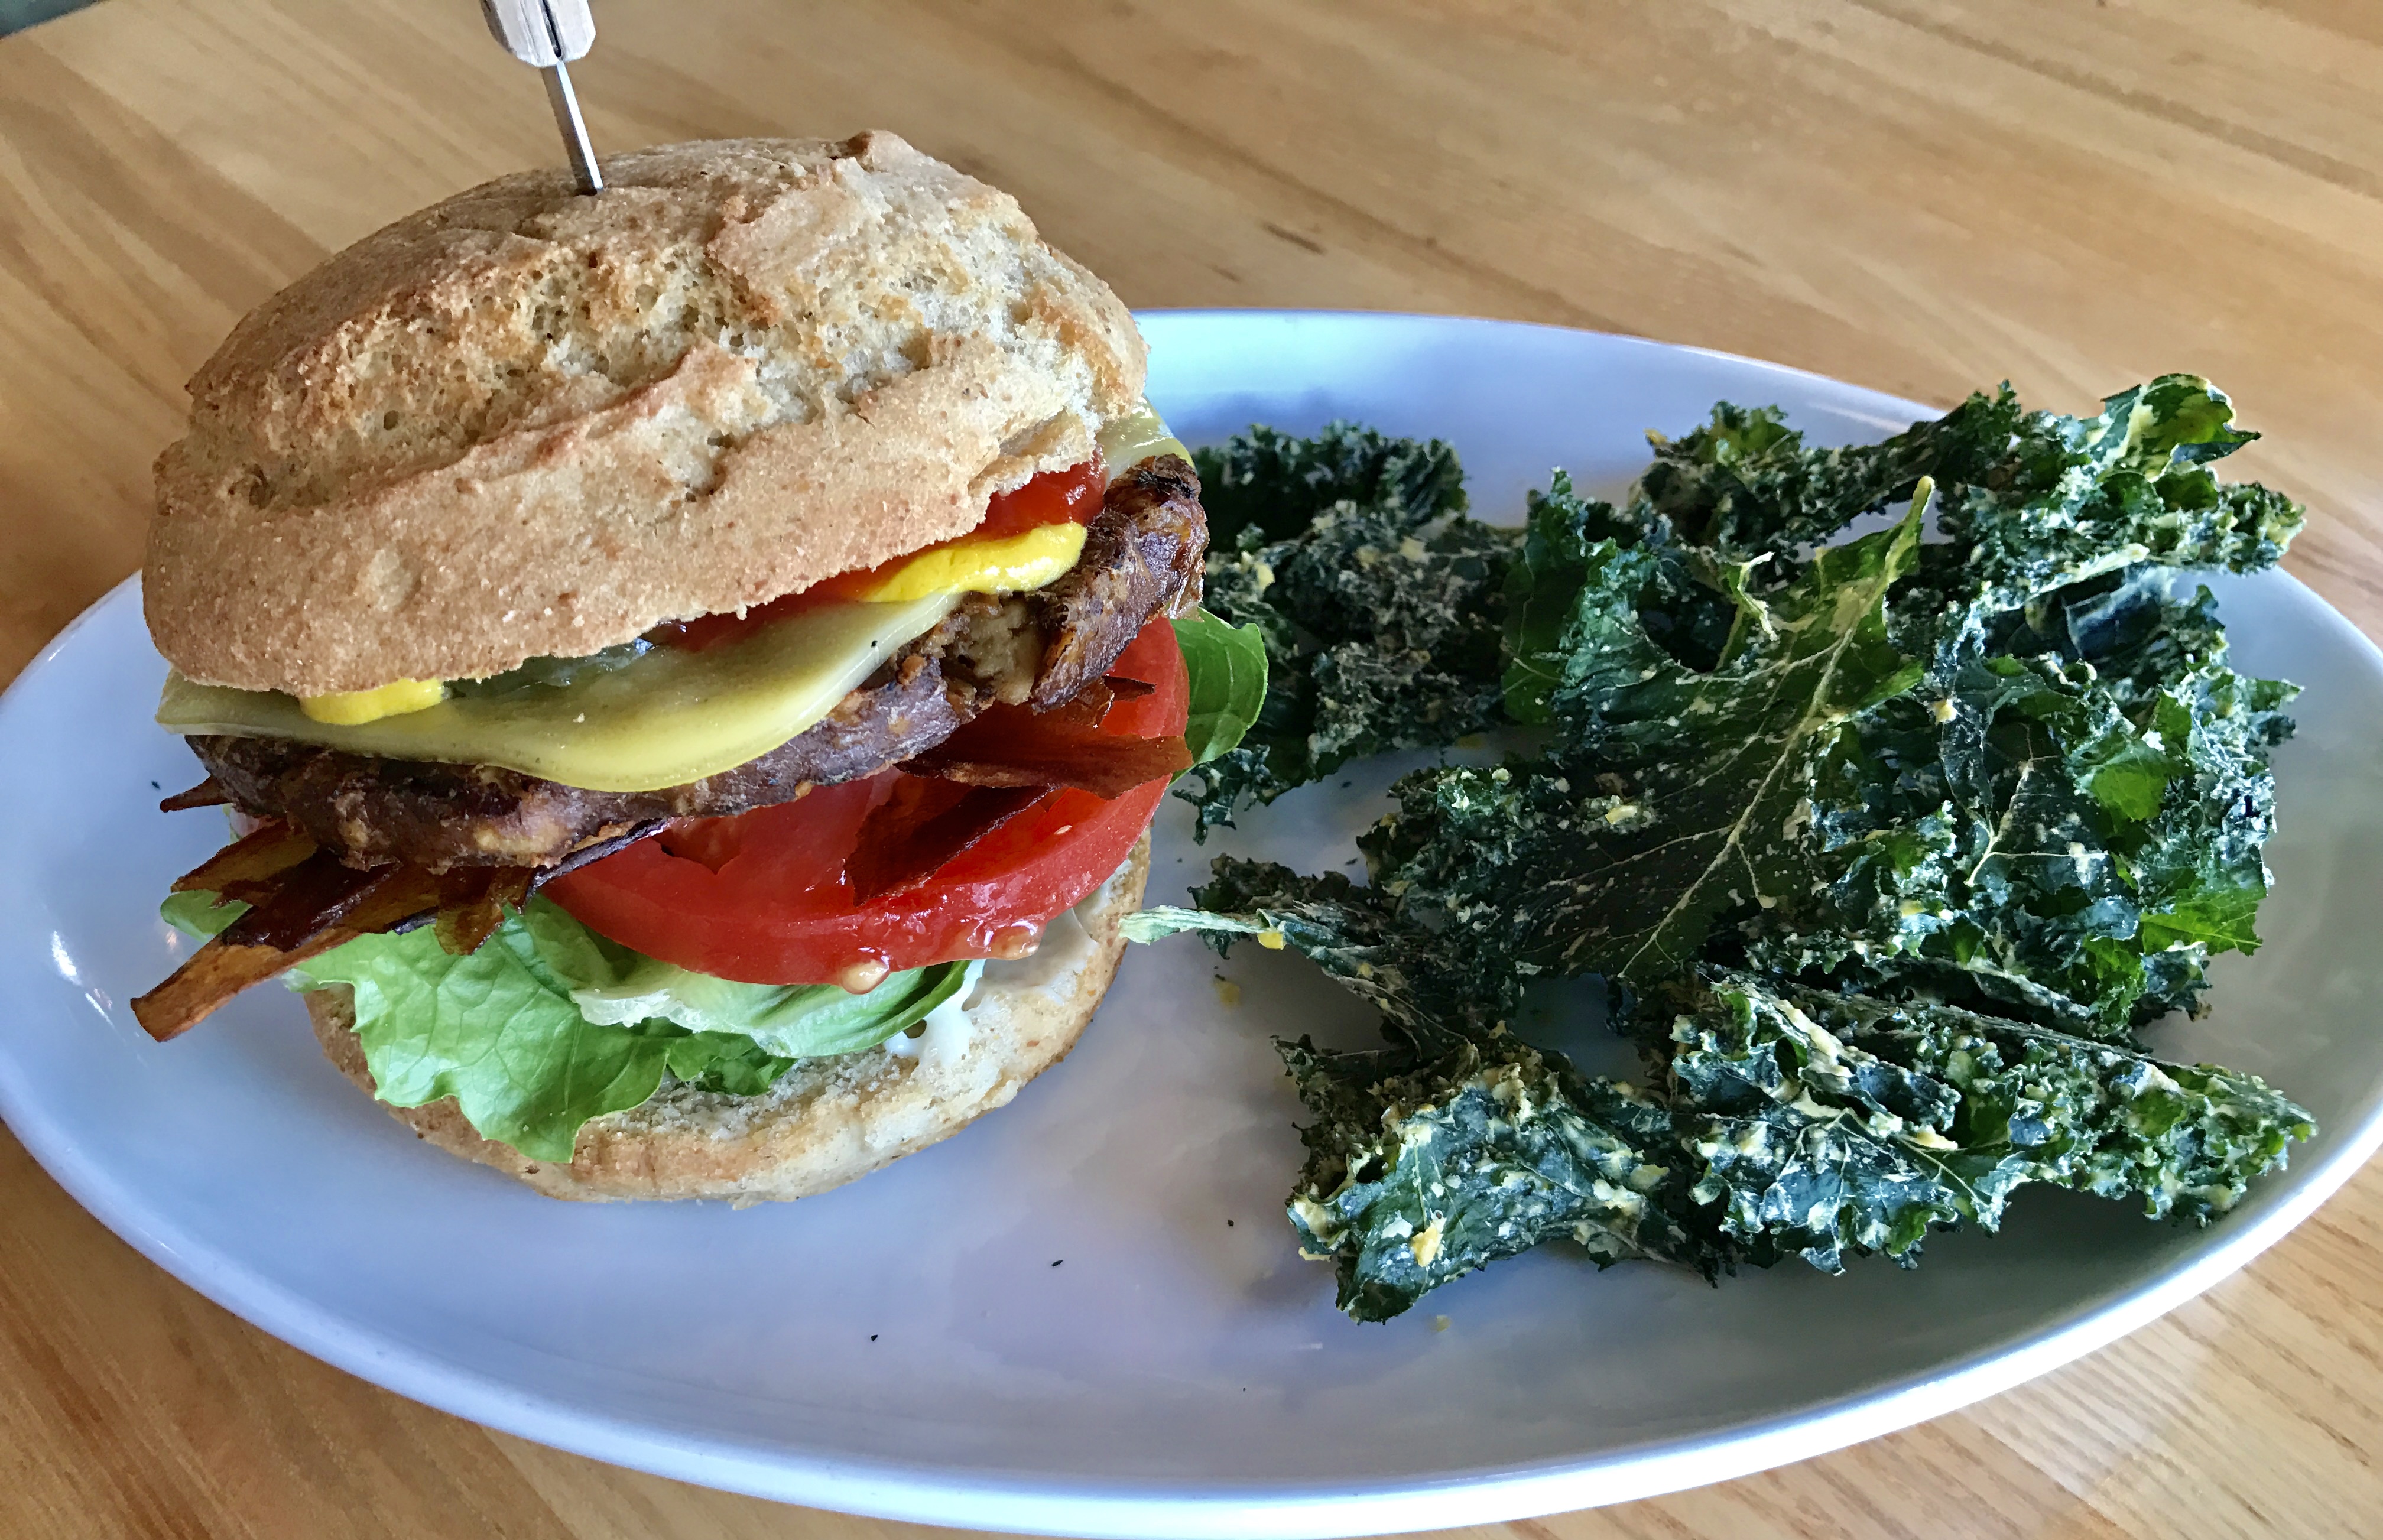 Cider Press Cafe: The Beast Burger and Cheesy Kale Chips